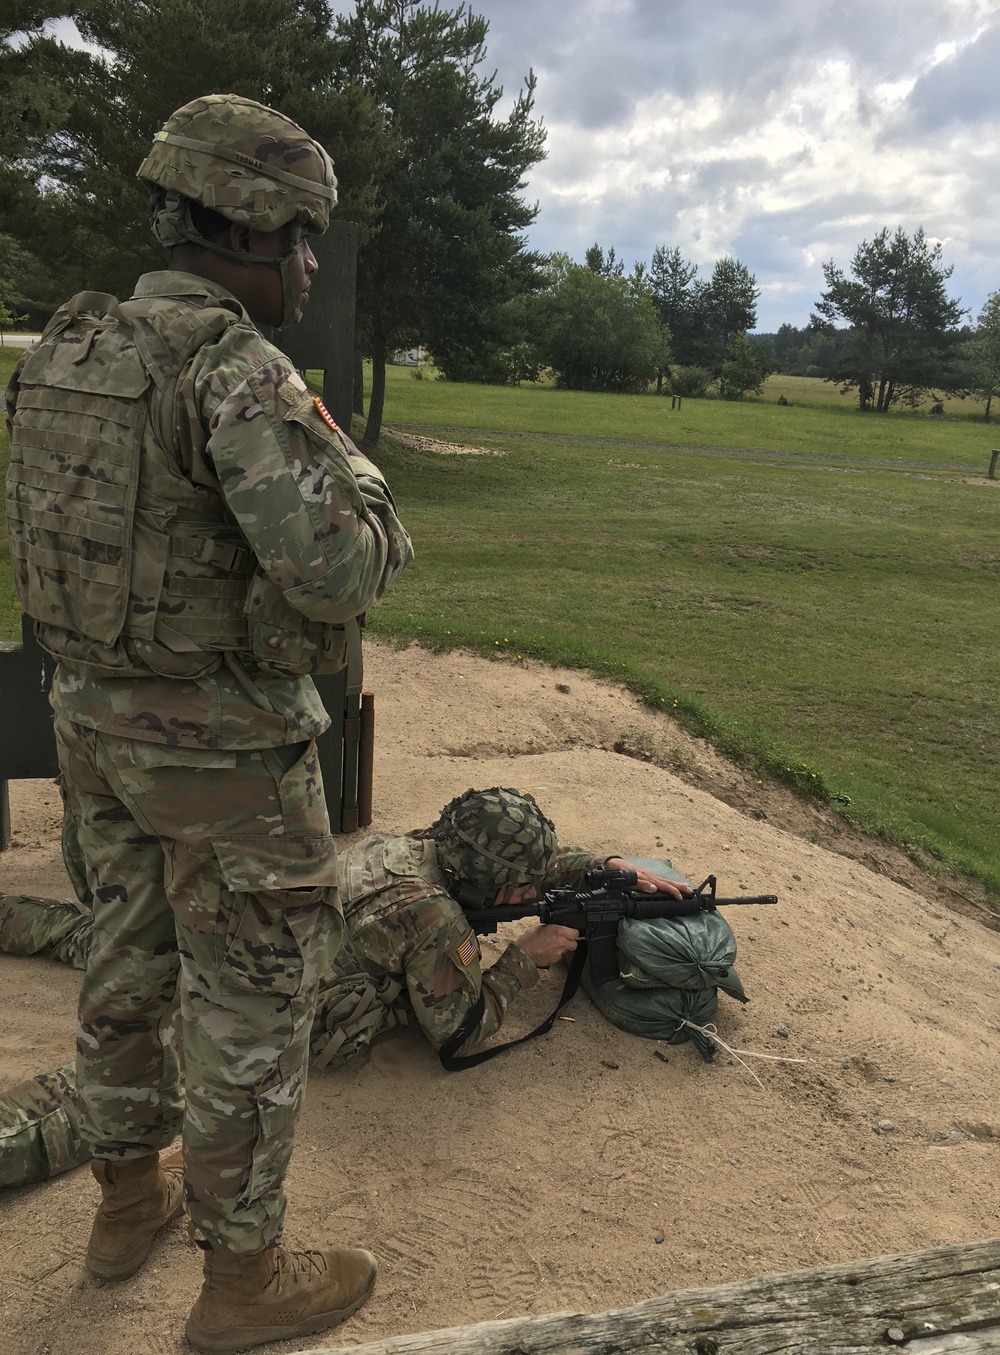 Peer instruction conducted during the U.S. Army Europe Marksmanship Training Course